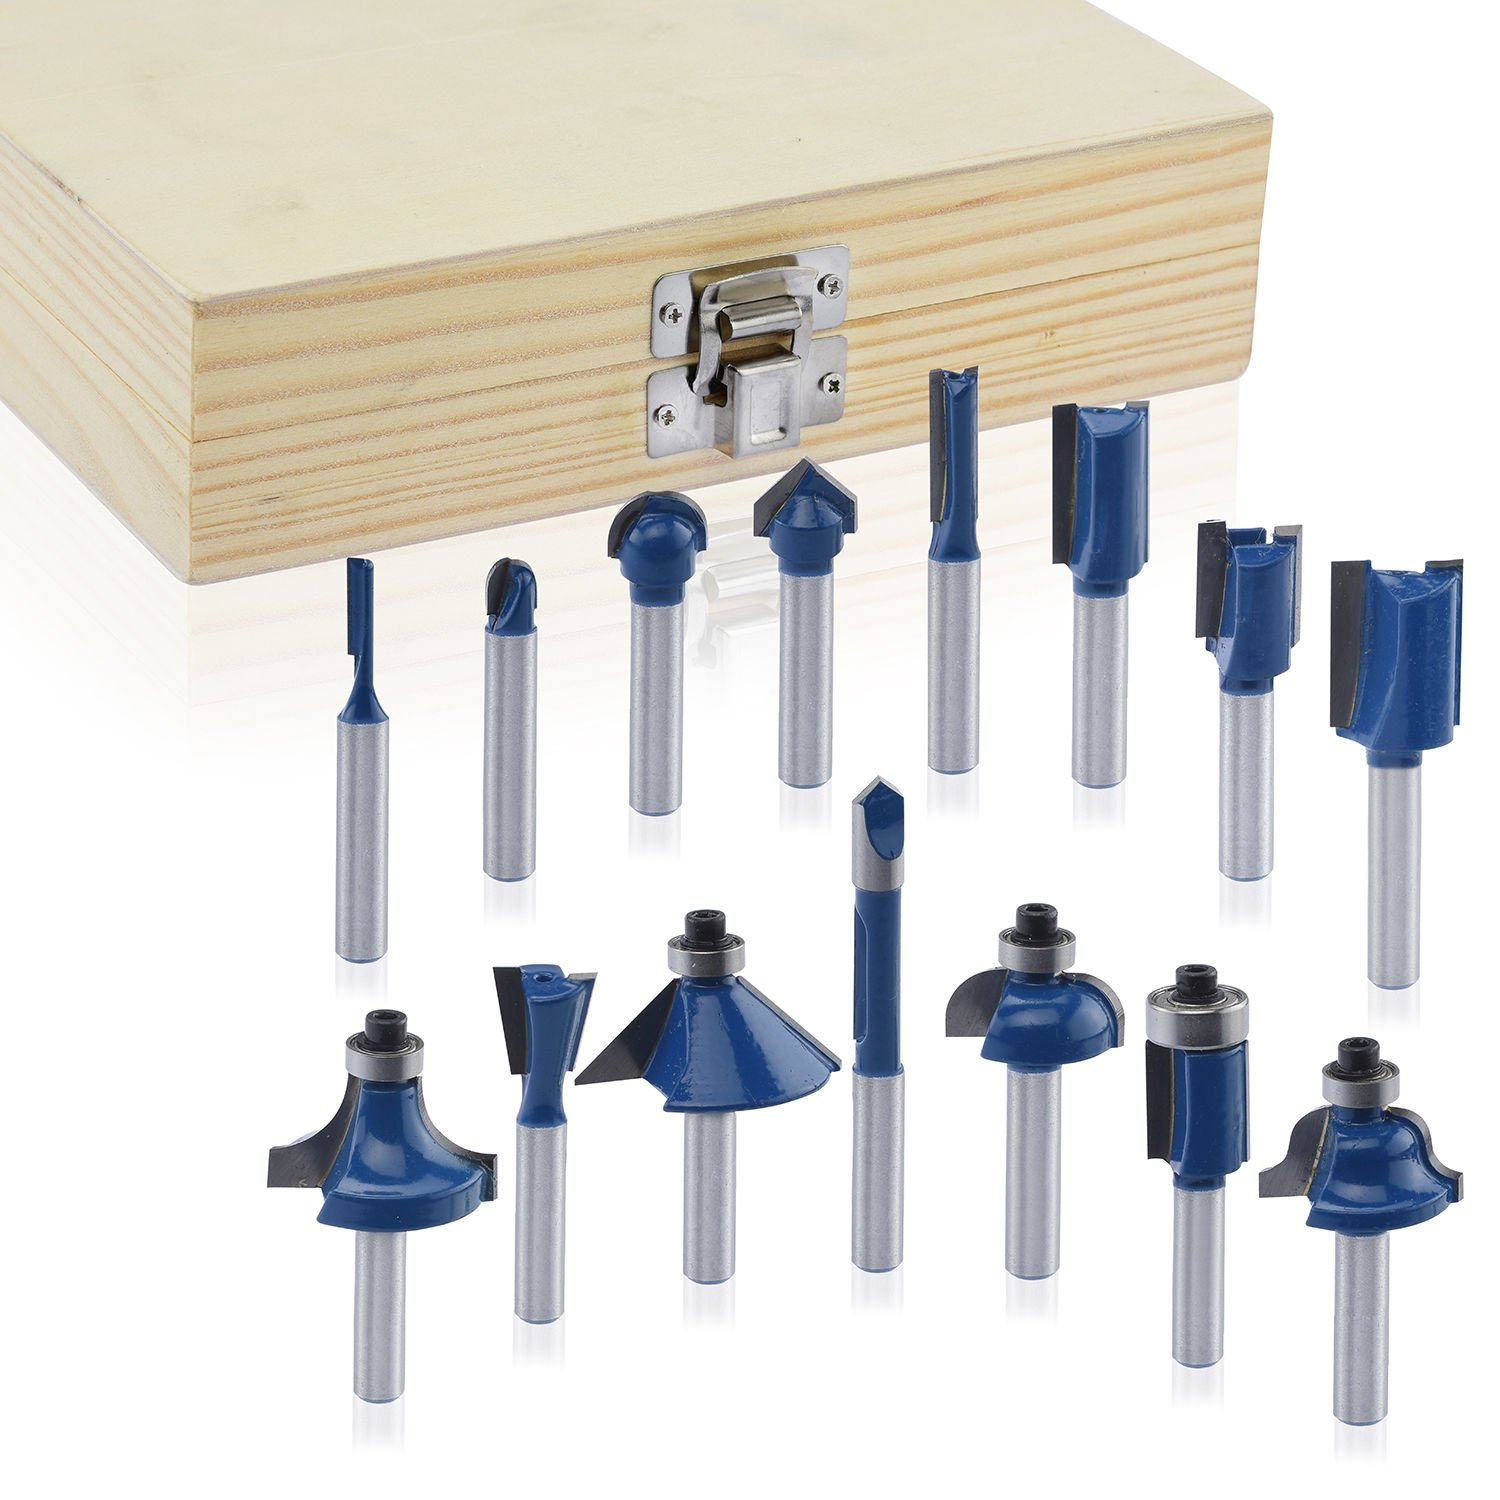 15pc Router Bits 1/4" inch Shank Tungsten Carbide Rotary Power Tool